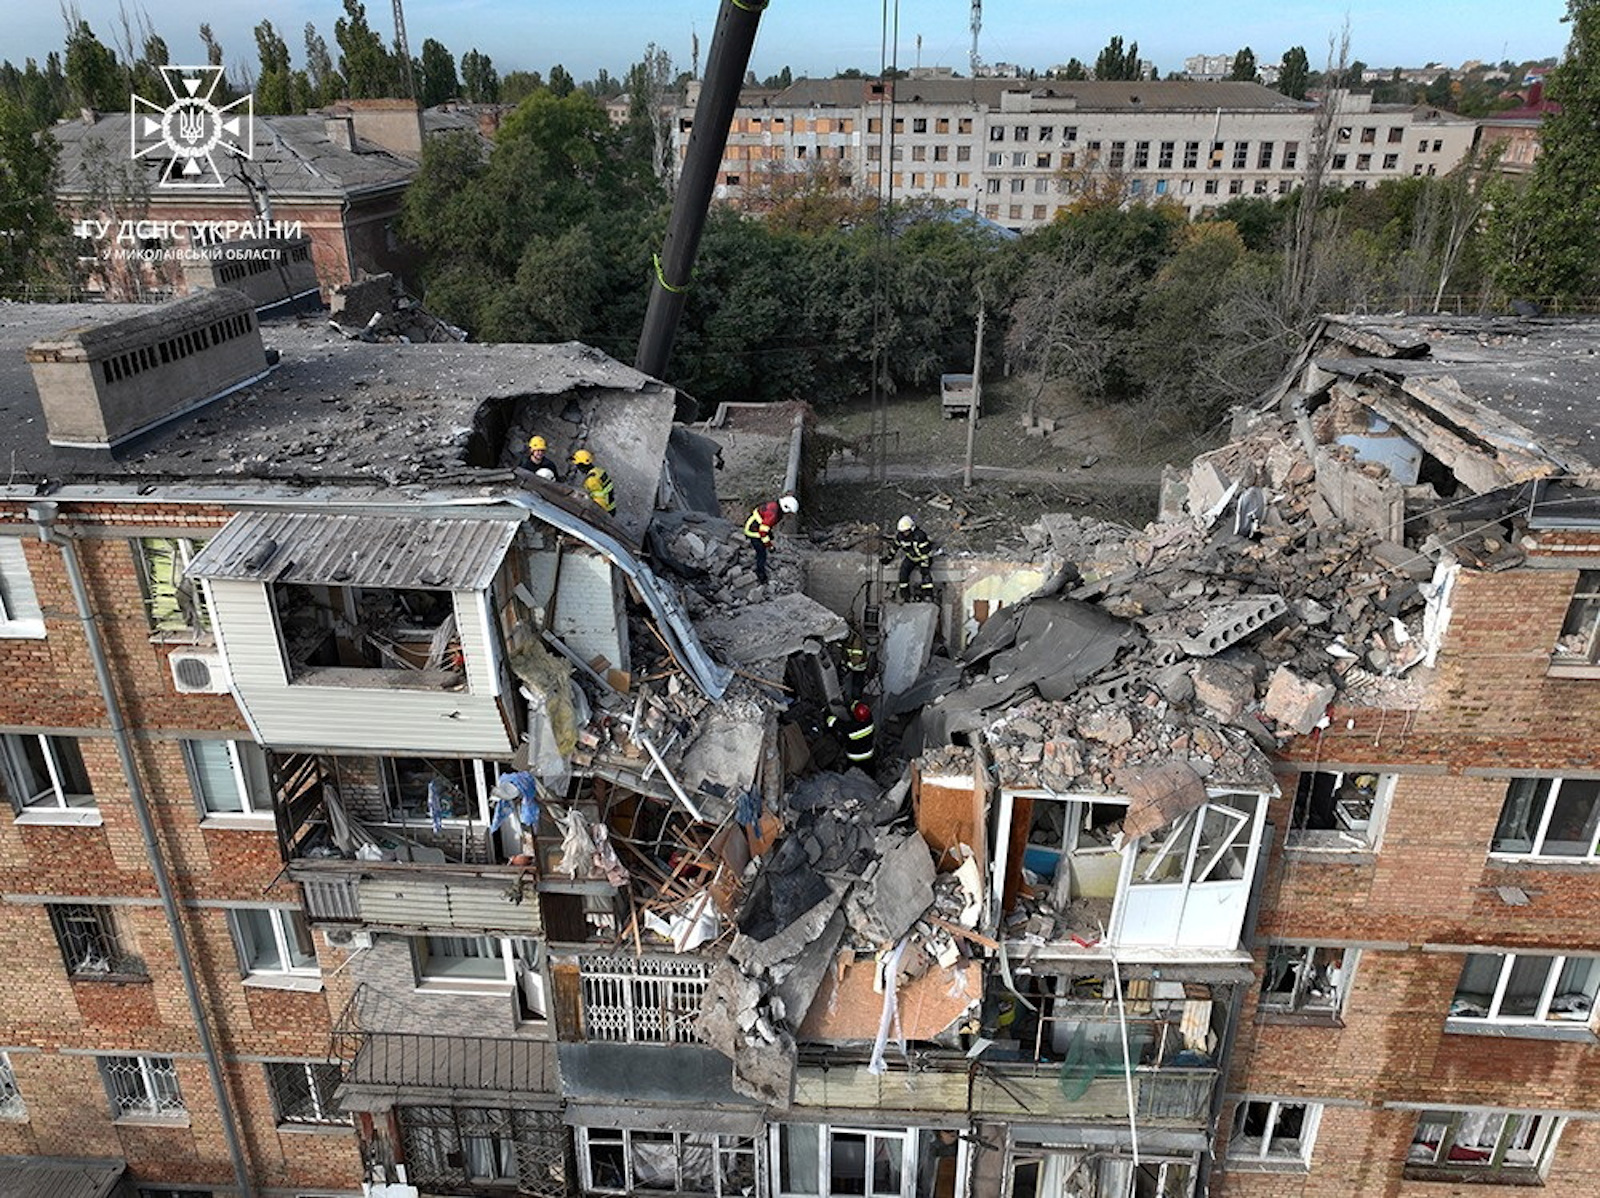 Rescuers work at the site of a residential building heavily damaged during a Russian military attack in Mykolaiv on October 13.